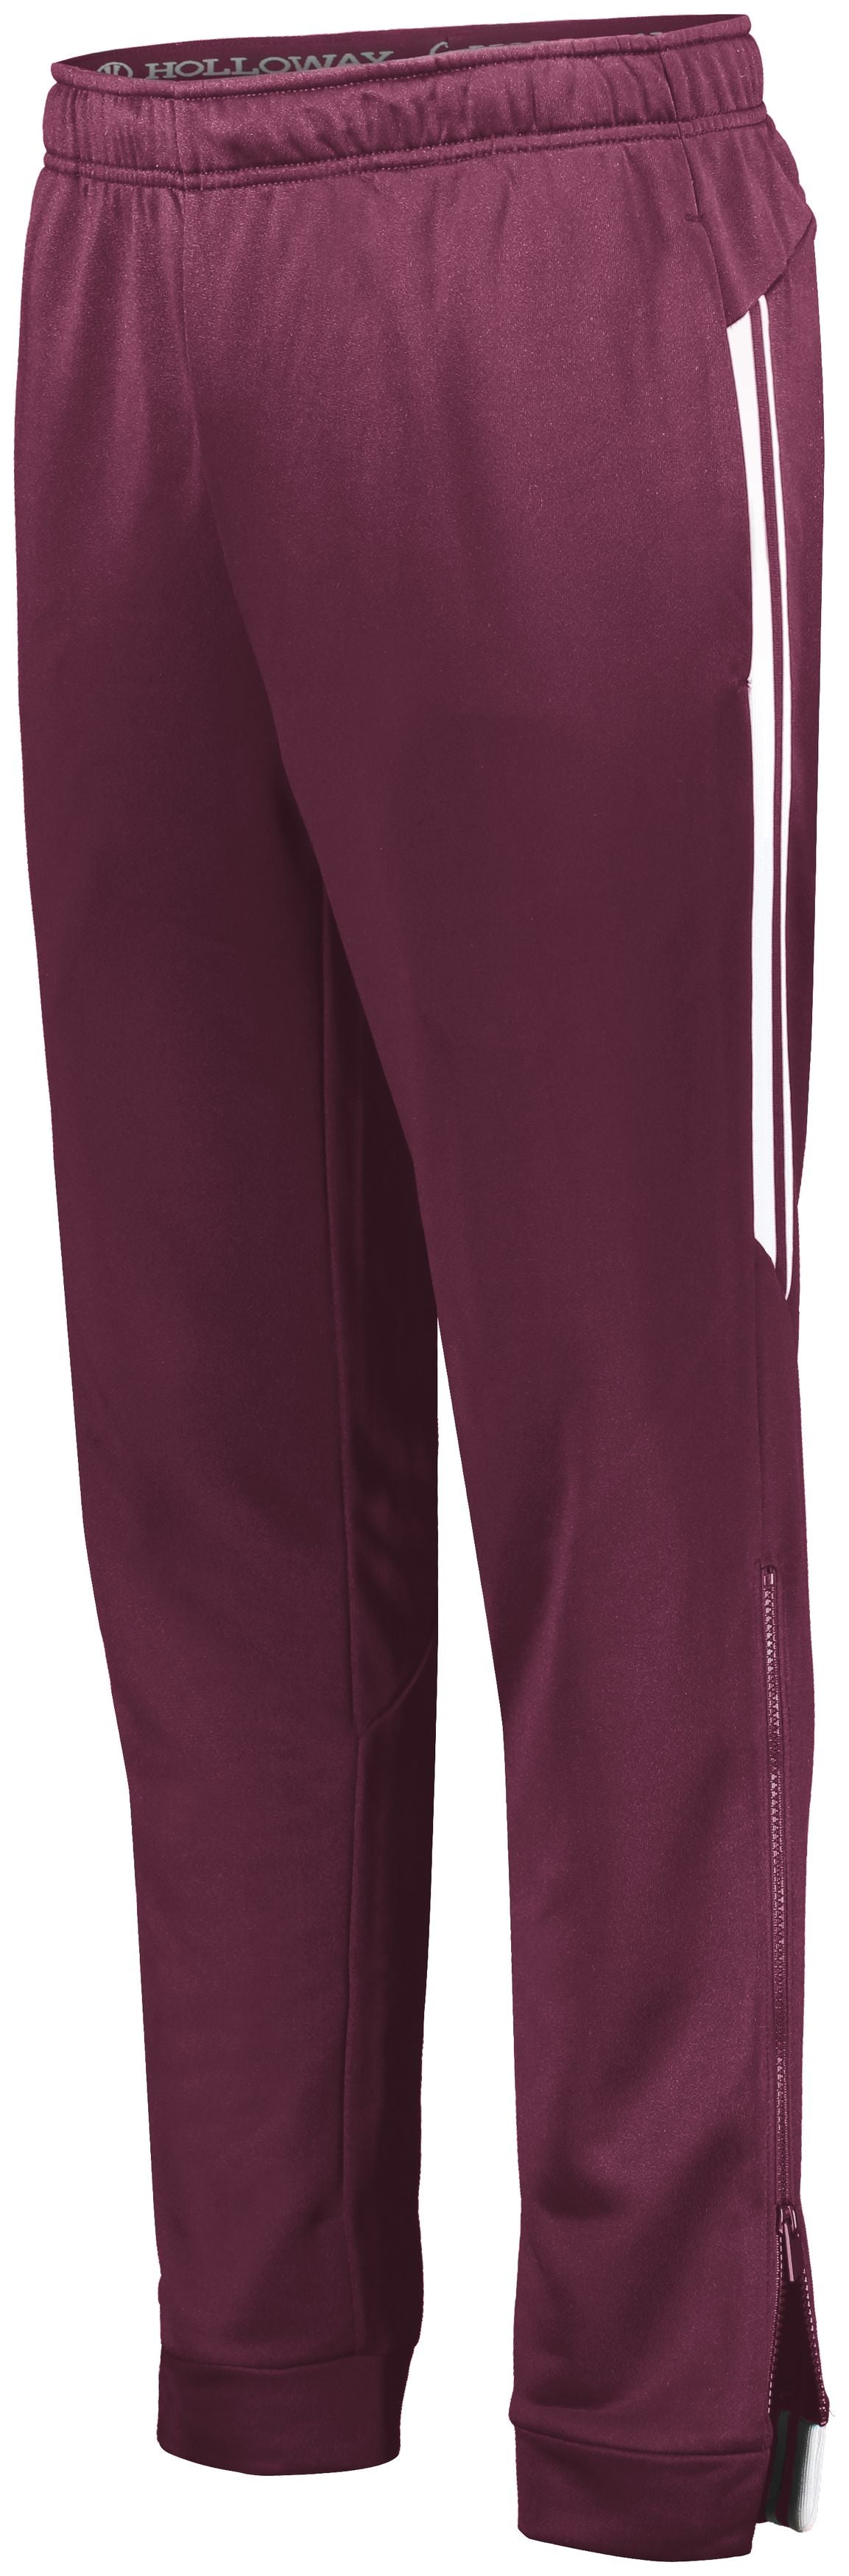 Holloway Retro Grade Pant in Maroon/White  -Part of the Adult, Adult-Pants, Pants, Holloway product lines at KanaleyCreations.com